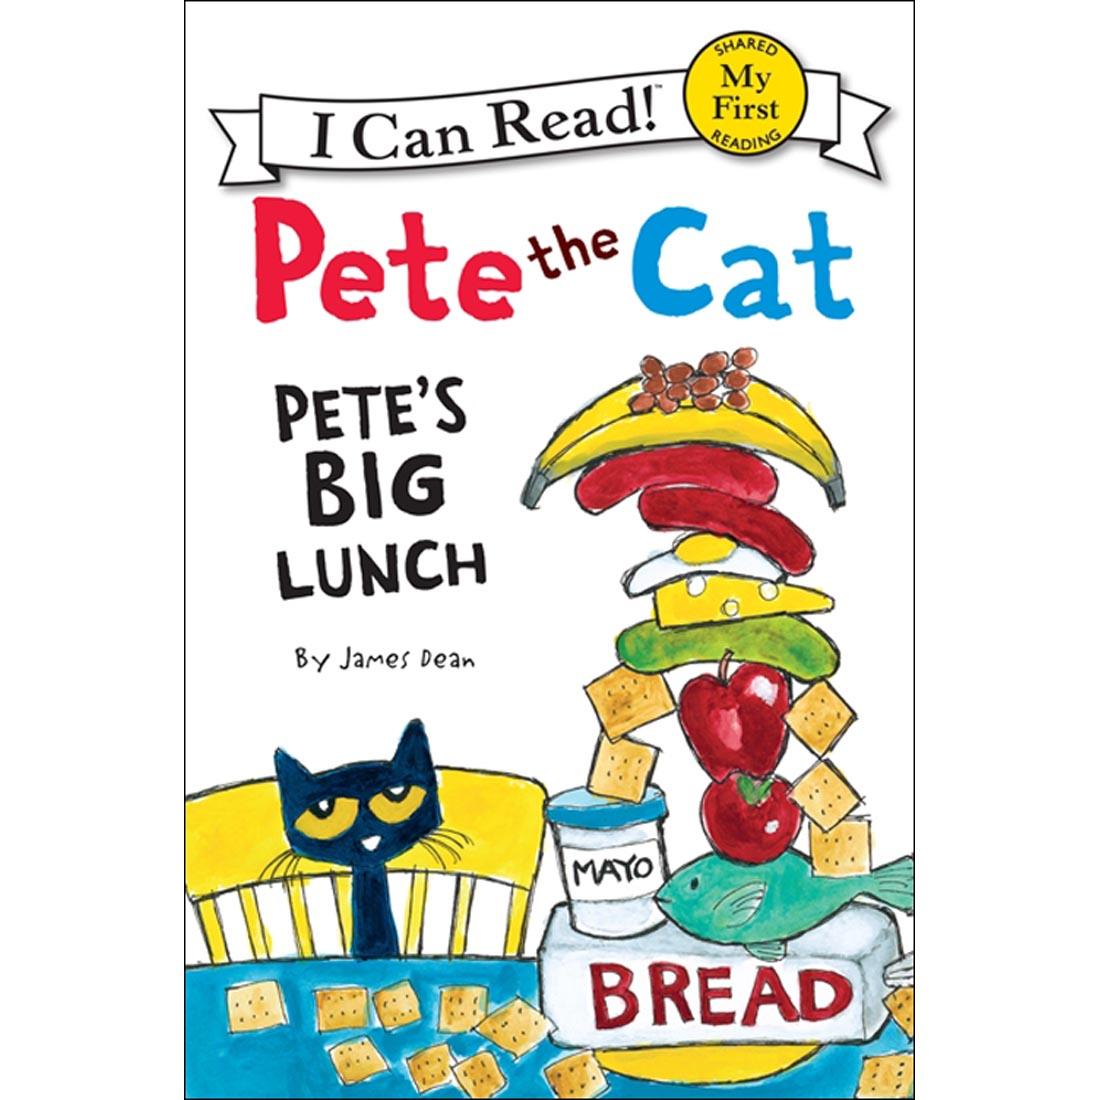 Pete The Cat: Pete's Big Lunch - A My First I Can Read Book, Shared Reading